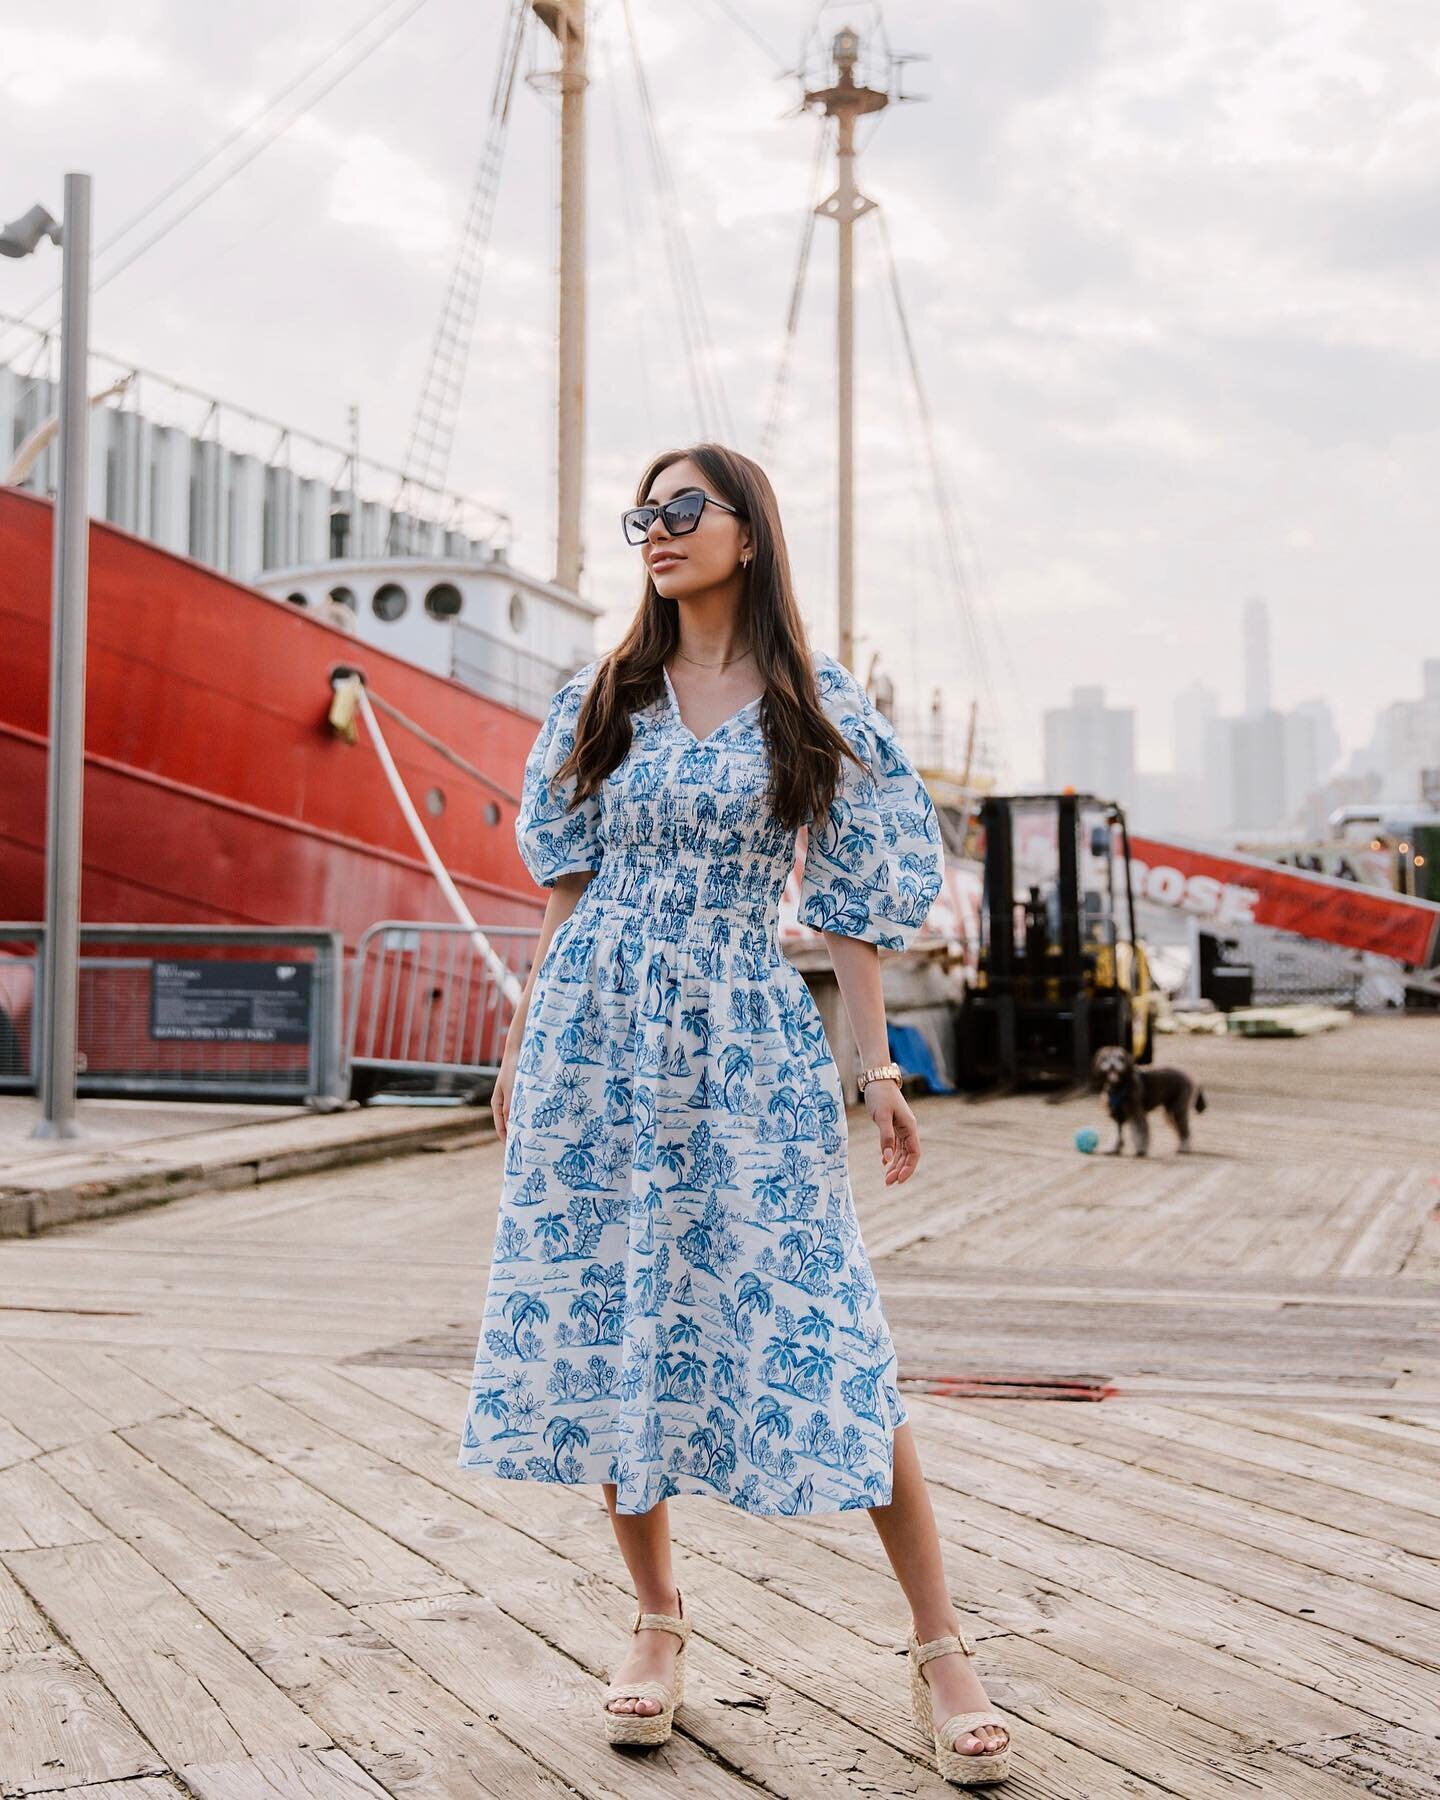 Seaport living 🚢
Tonight I am taking a @circlelinenyc cruise to see Statue of Liberty at Sunset 🌅 🗽
.
Dress: @jessiezhaonewyork (if anyone is planning a trip to one of many beautiful Caribbean islands, this dress is PERFECT for it!) 
📷 : @streets